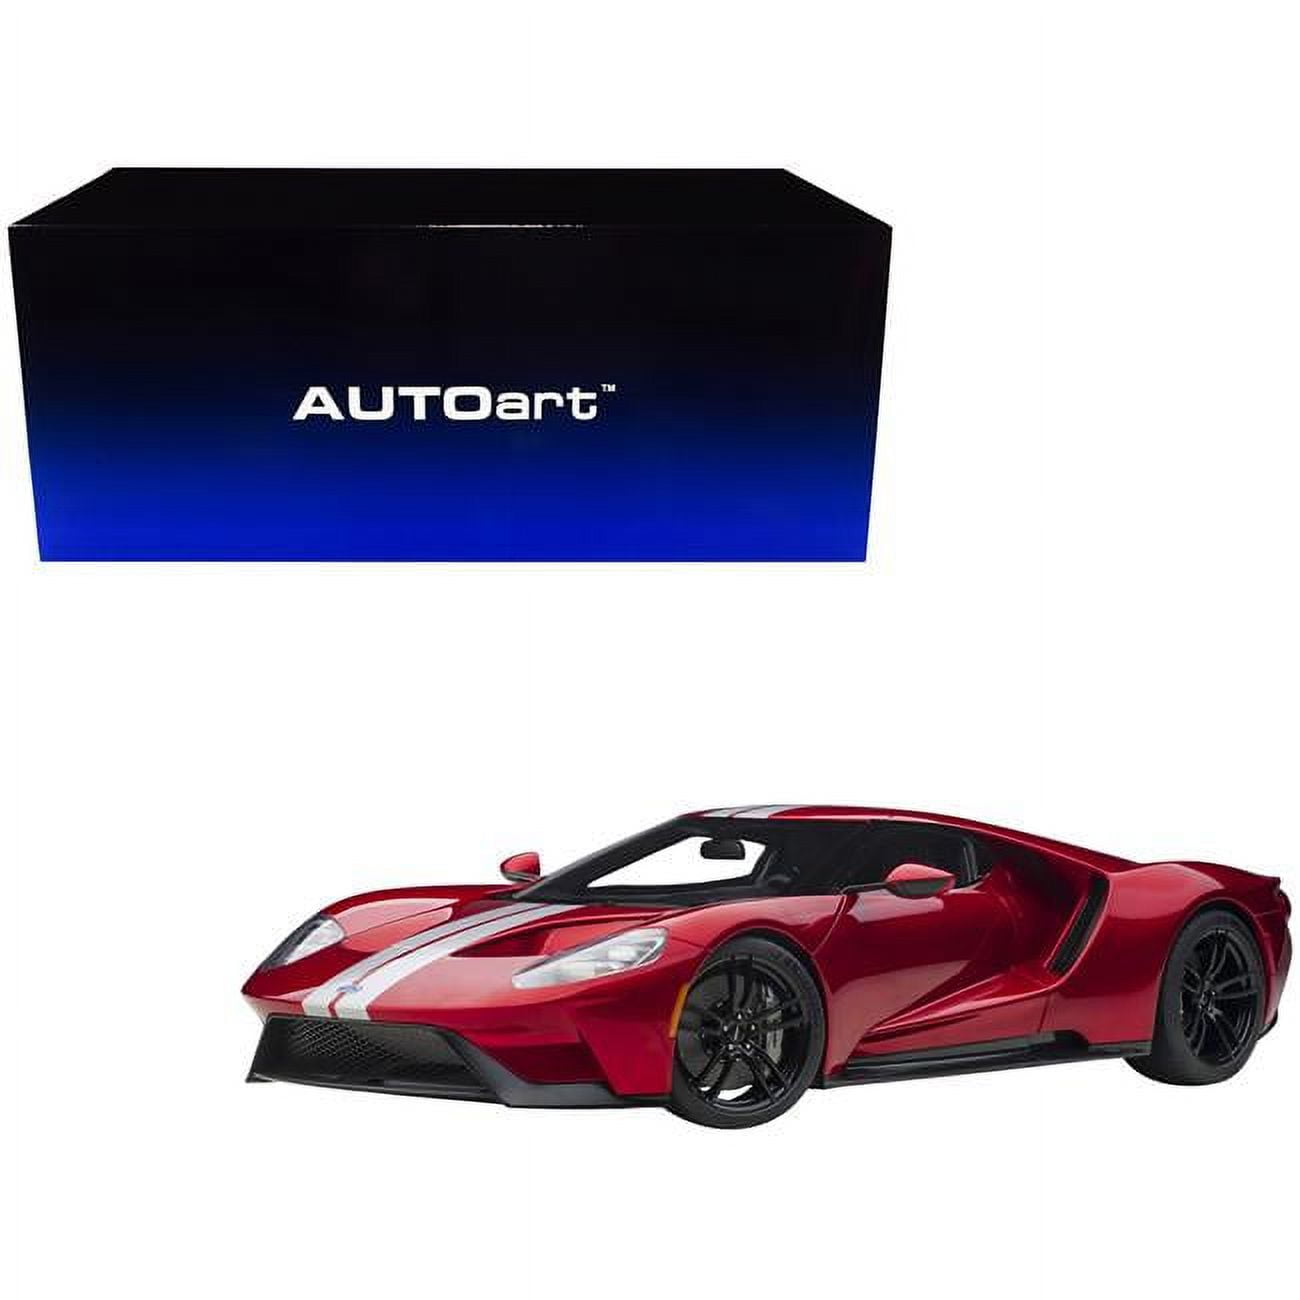 Picture of Autoart 12106 Liquid Red Metallic with Silver Stripes 1 by 12 Scale Model Car for 2017 Ford GT